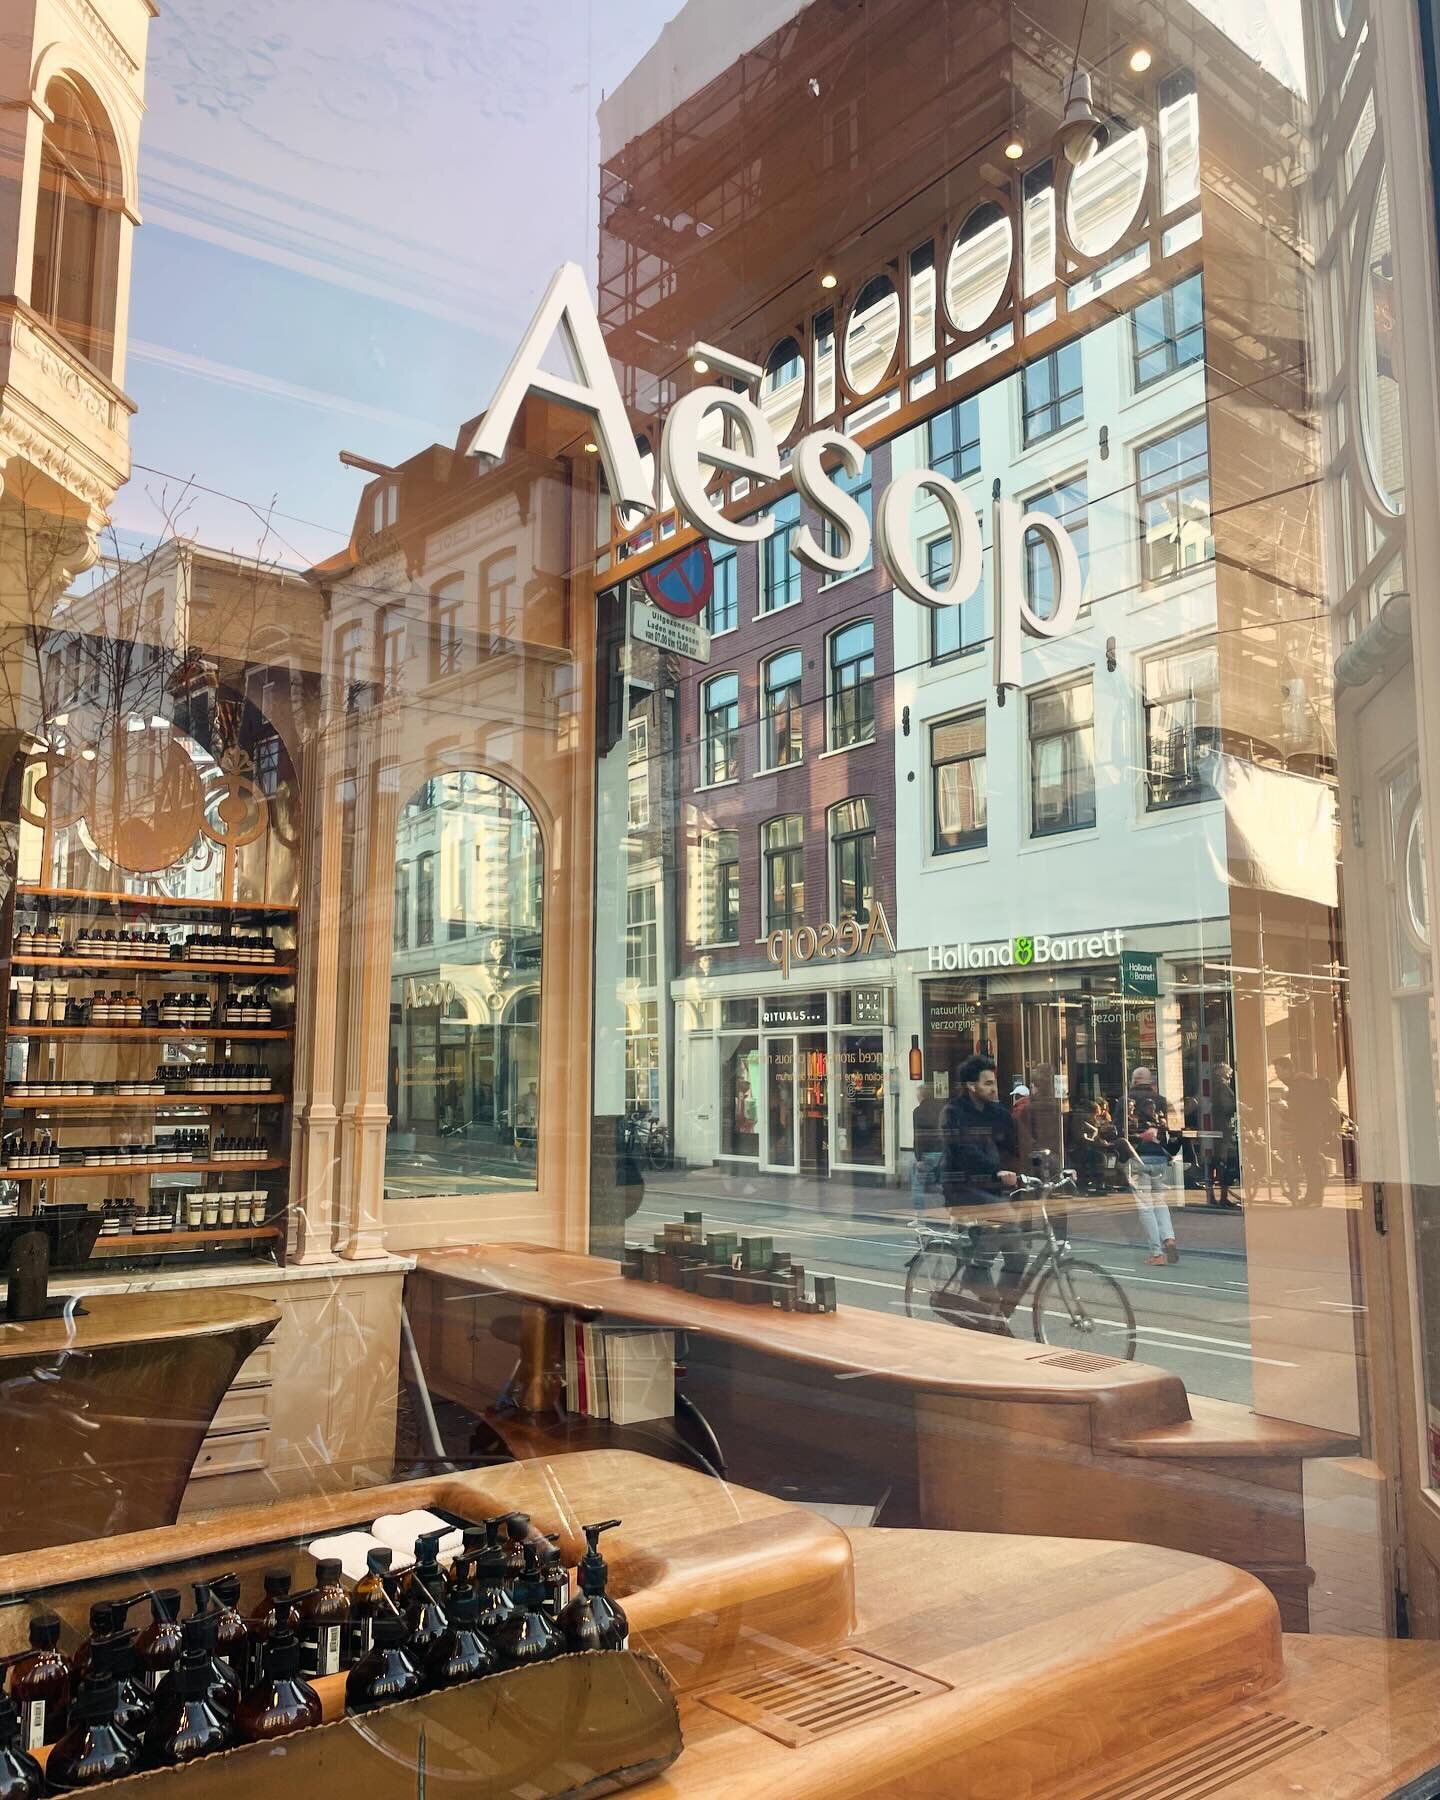 @retail.factory is in Amsterdam this week, scouting for our next #retailtour, and here is the @aesopskincare store on Utrechtestraat that caught our eye. Located in an old 17th century building and former candy store, the pink shades, copper curves a